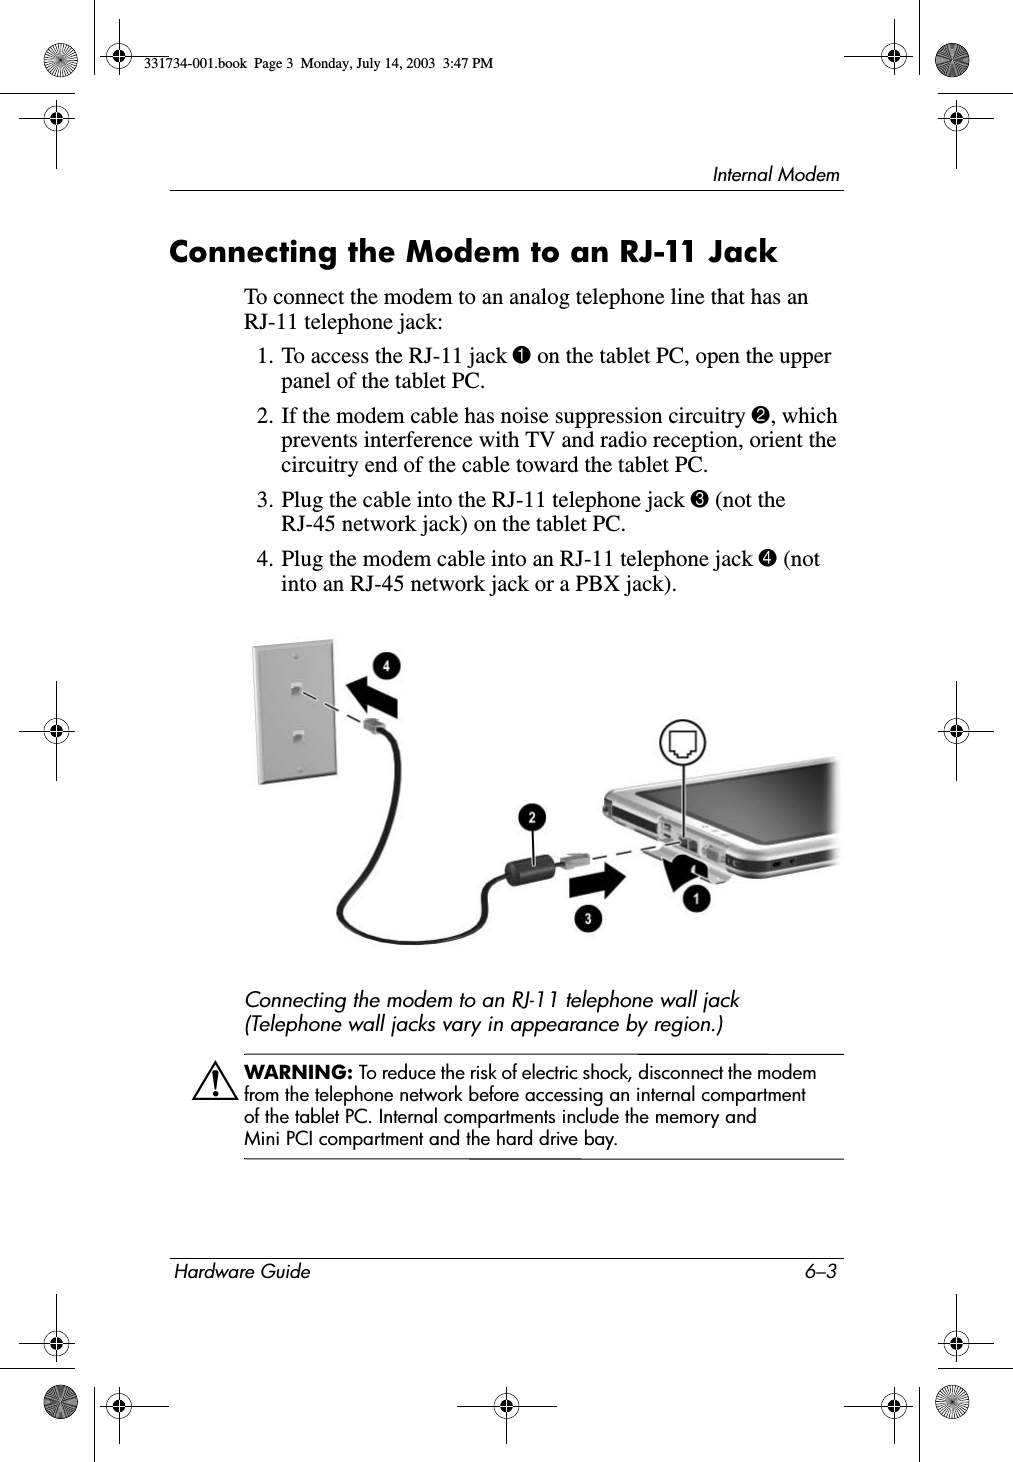 Internal ModemHardware Guide 6–3Connecting the Modem to an RJ-11 JackTo connect the modem to an analog telephone line that has an RJ-11 telephone jack:1. To access the RJ-11 jack 1 on the tablet PC, open the upper panel of the tablet PC.2. If the modem cable has noise suppression circuitry 2, which prevents interference with TV and radio reception, orient the circuitry end of the cable toward the tablet PC.3. Plug the cable into the RJ-11 telephone jack 3 (not the RJ-45 network jack) on the tablet PC.4. Plug the modem cable into an RJ-11 telephone jack 4 (not into an RJ-45 network jack or a PBX jack).Connecting the modem to an RJ-11 telephone wall jack (Telephone wall jacks vary in appearance by region.)ÅWARNING: To reduce the risk of electric shock, disconnect the modem from the telephone network before accessing an internal compartment of the tablet PC. Internal compartments include the memory and Mini PCI compartment and the hard drive bay.331734-001.book  Page 3  Monday, July 14, 2003  3:47 PM